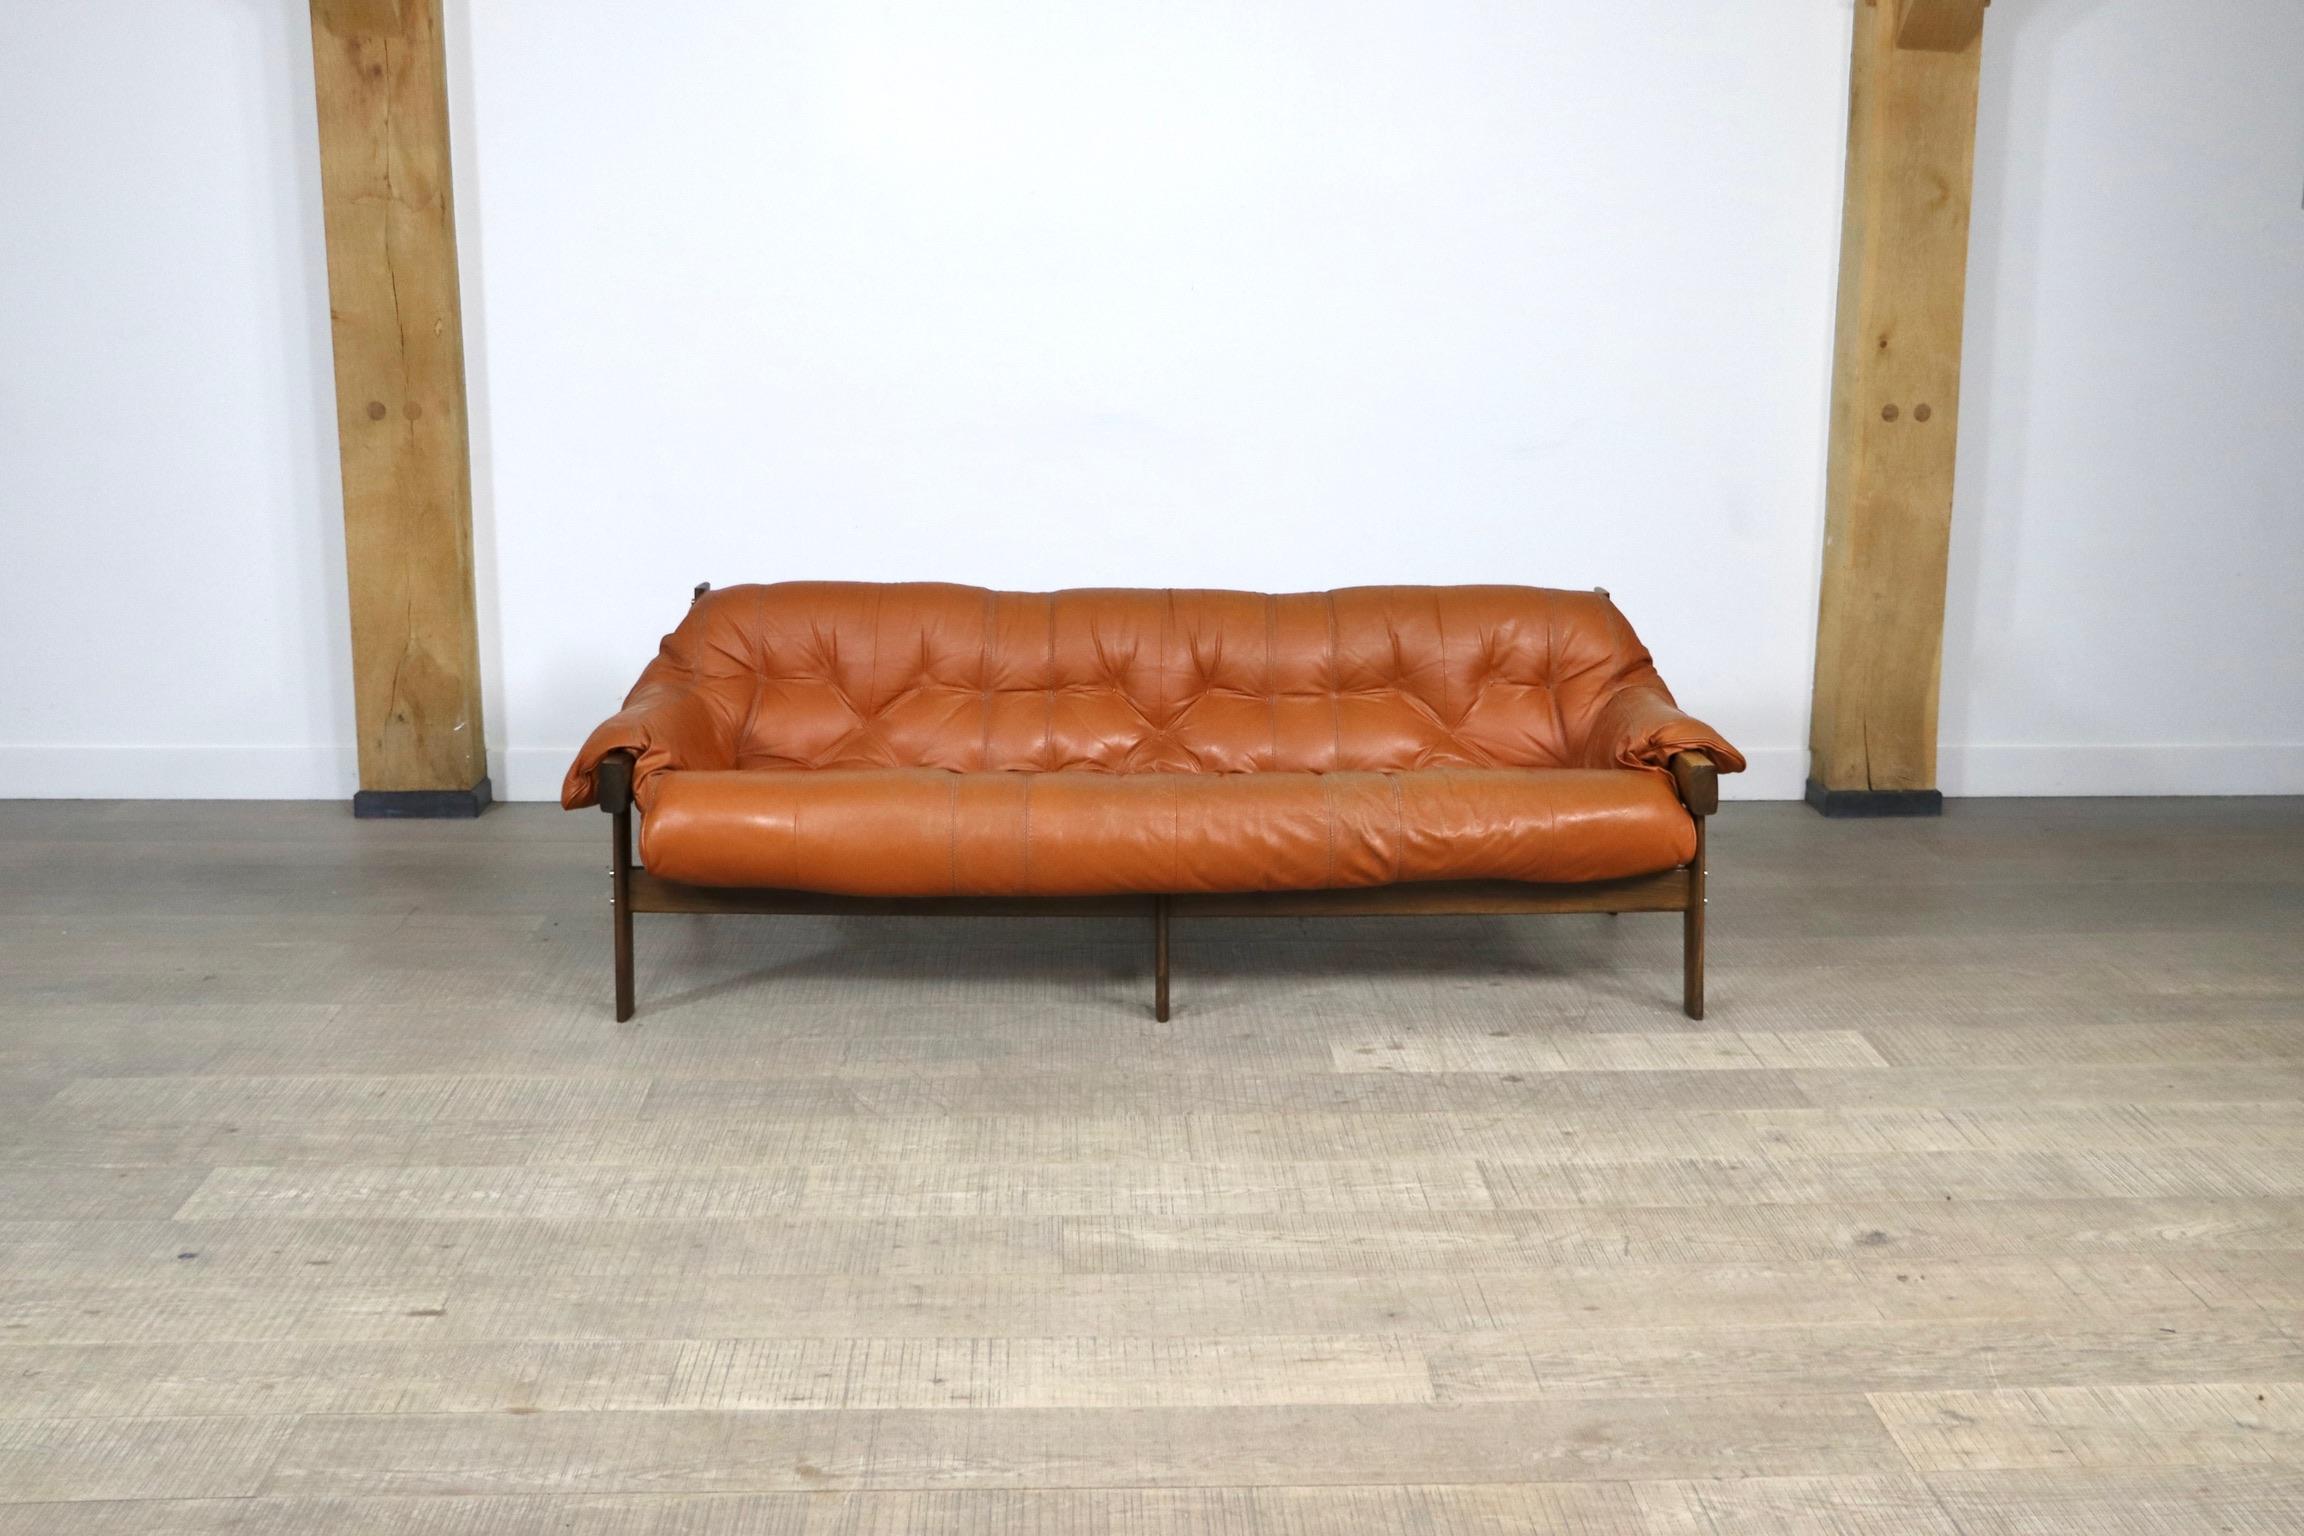 Amazing MP-41 three seater sofa in original cognac leather and jacaranda wood frame, designed by Percival Lafer for MP Lafer, 1970s. The sofa has its original mark in the leather strap on the back, as shown in te pictures.
This highly comfortable